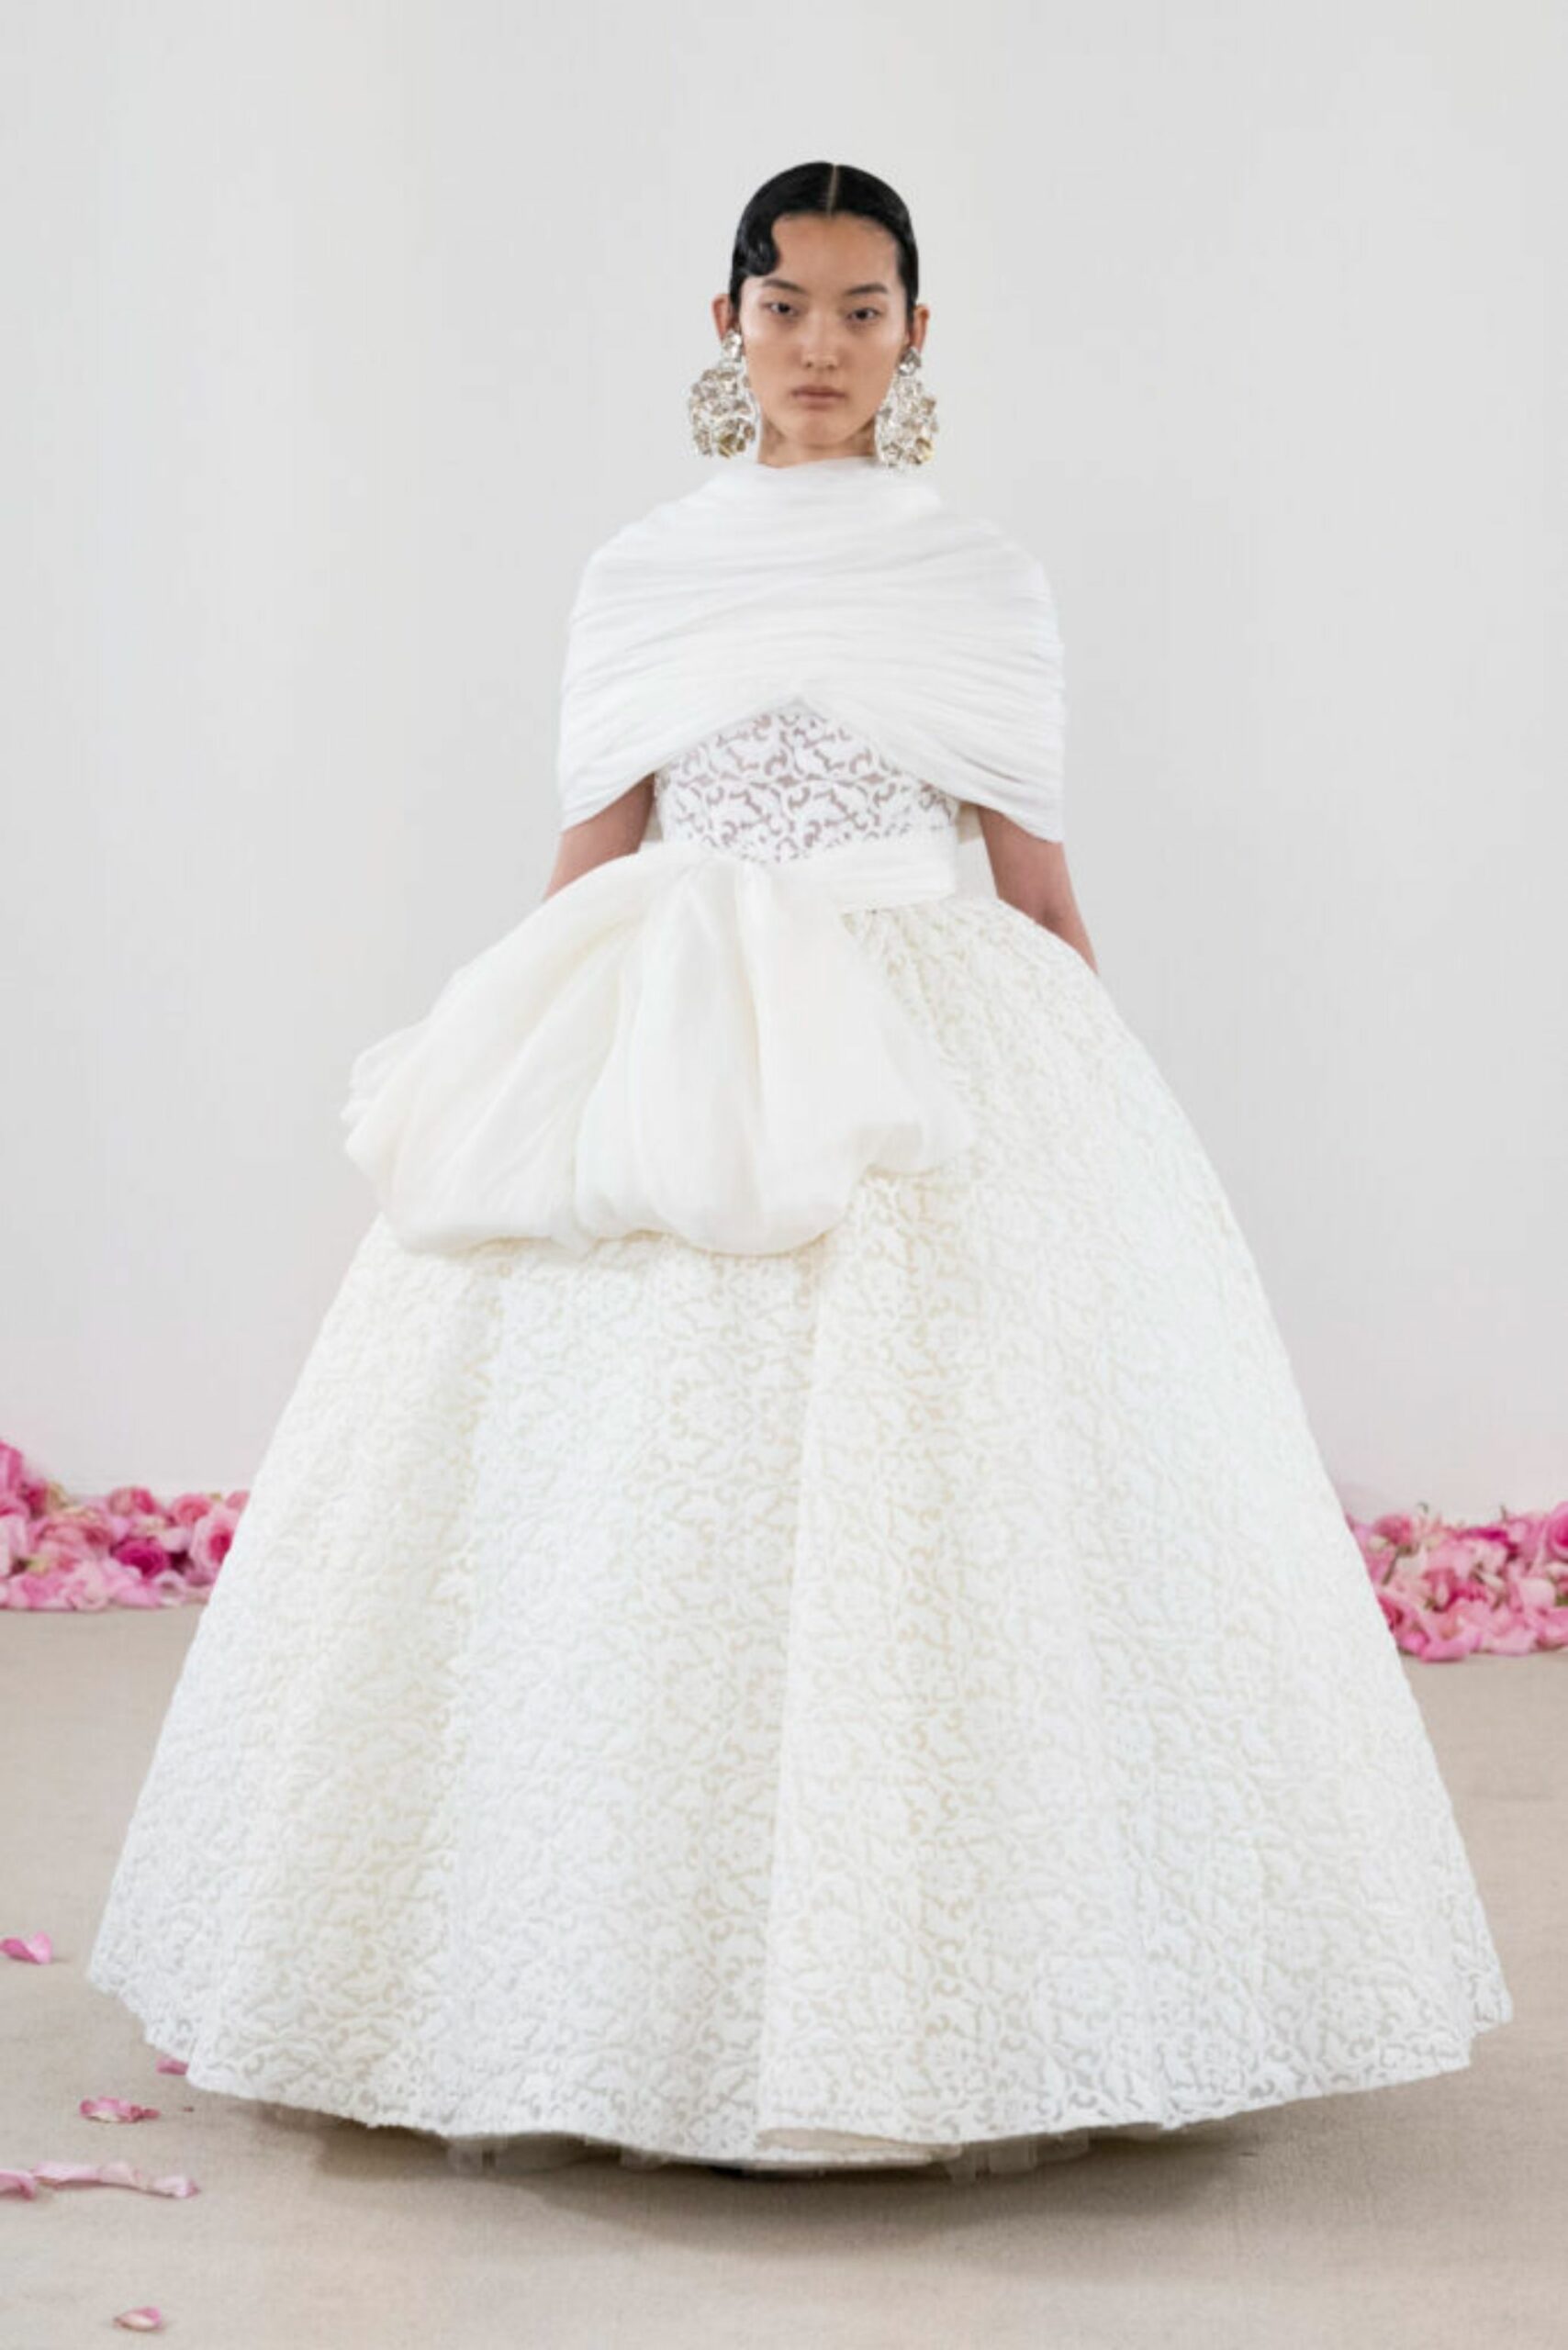 An all-white gown from the new Giambattista Valli Haute Couture 25 collection.